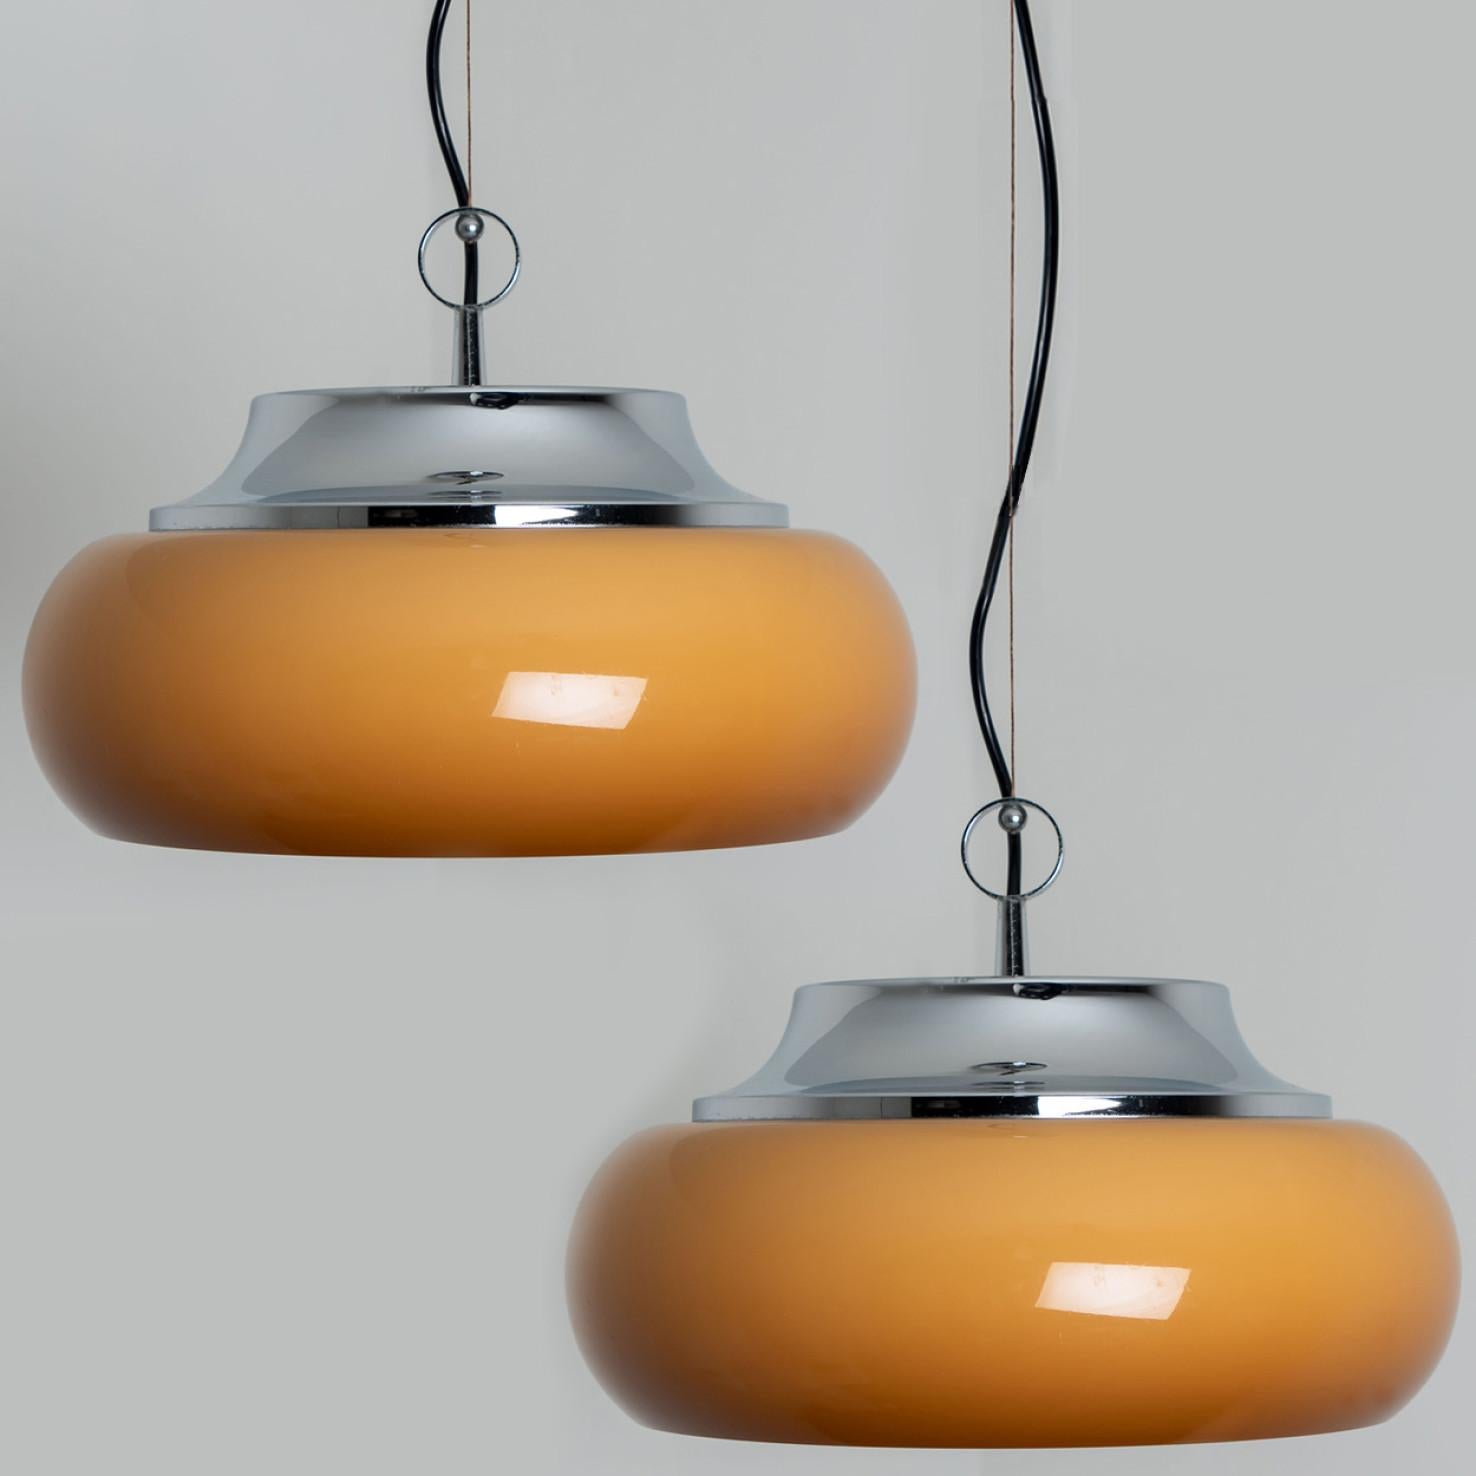 Pair of  beautiful Guzzini pendant lamps made by Meblo Yugoslavia in the 1970s.
A very fun pendant light, in space age  and retro style, because of the use of chrome and brown orange plexi glass.
Because of the orange plexi glass, it's a feast for